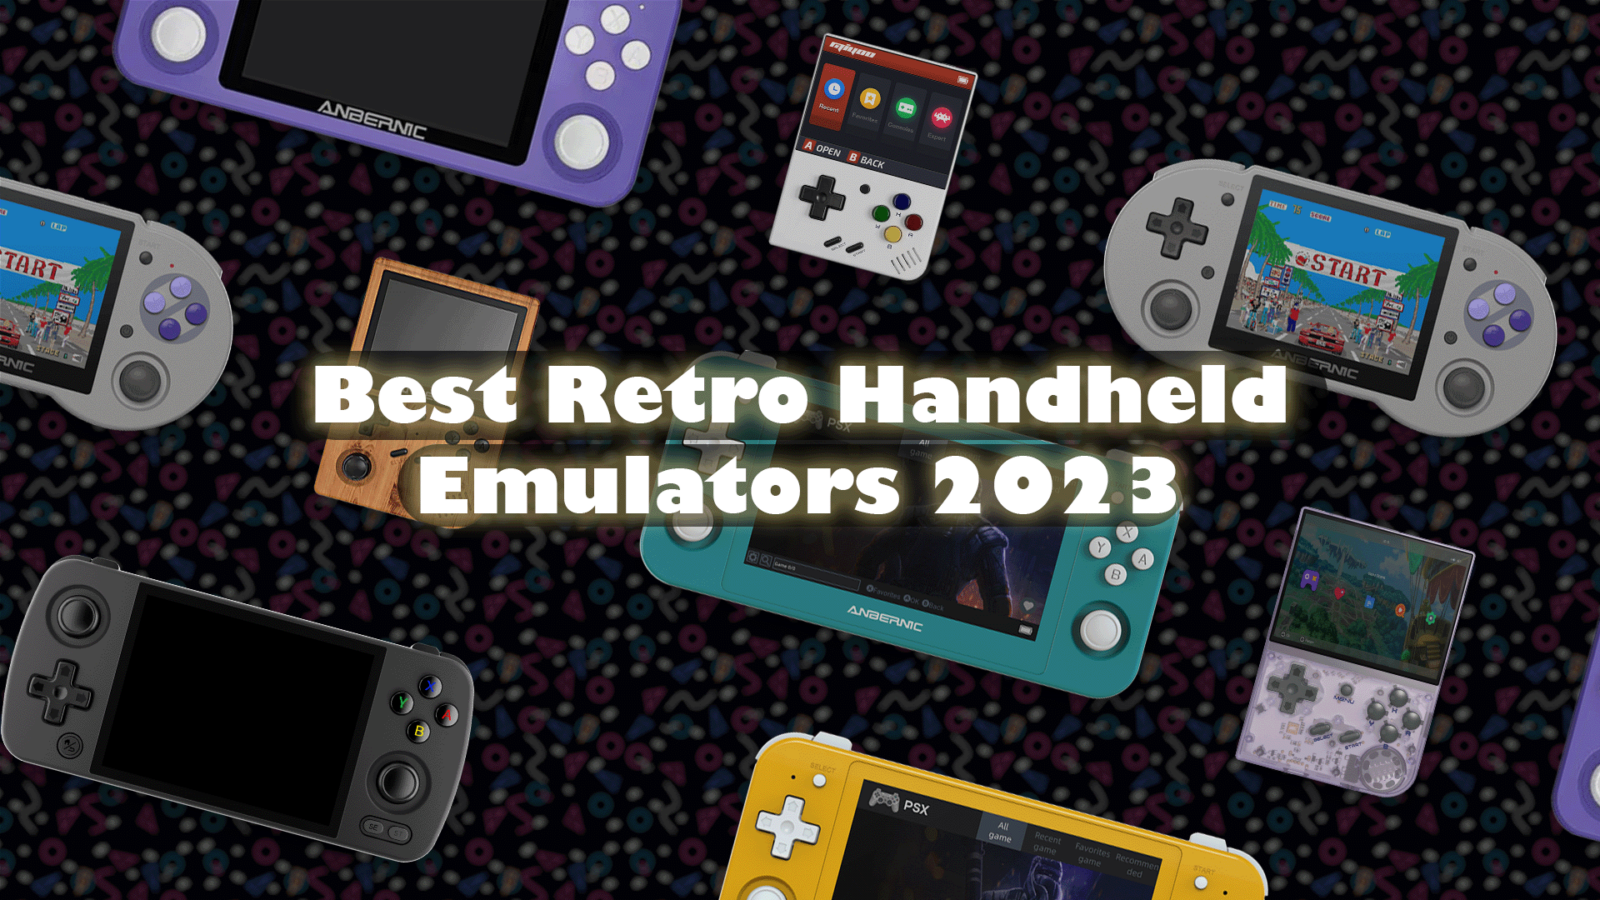 16 Best GBA Emulators For PC & Android in 2023